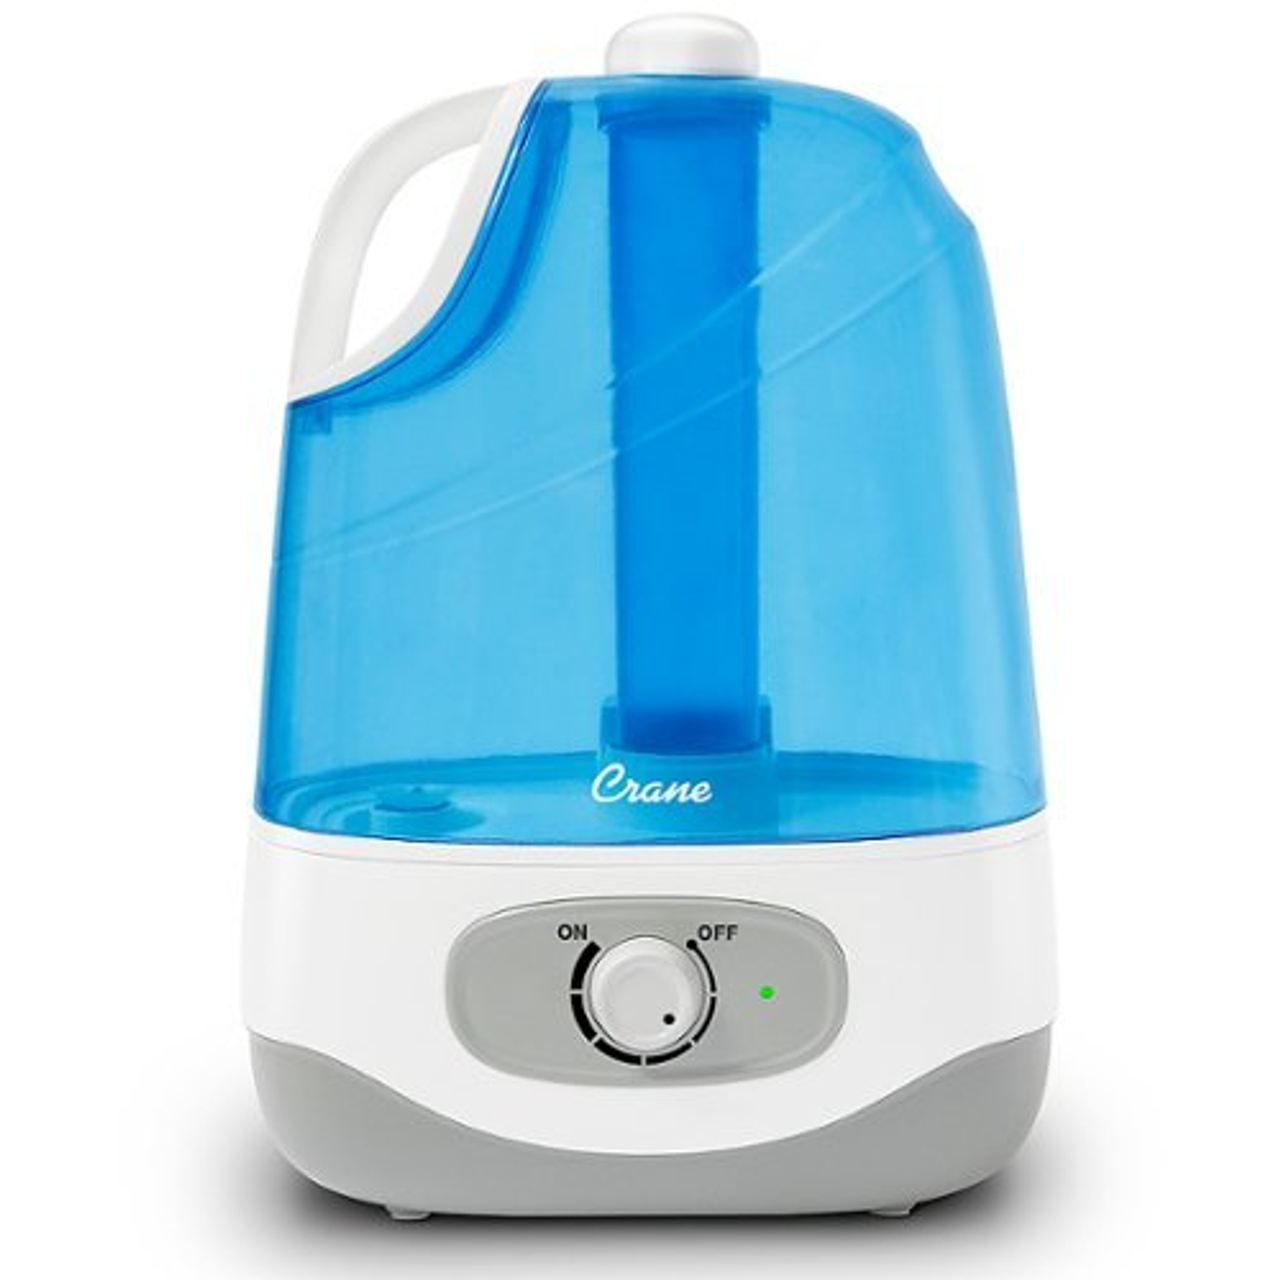 CRANE - 1 Gal. Ultrasonic Cool Mist Humidifier for Medium to Large Rooms up to 500 sq. ft. - Blue/White